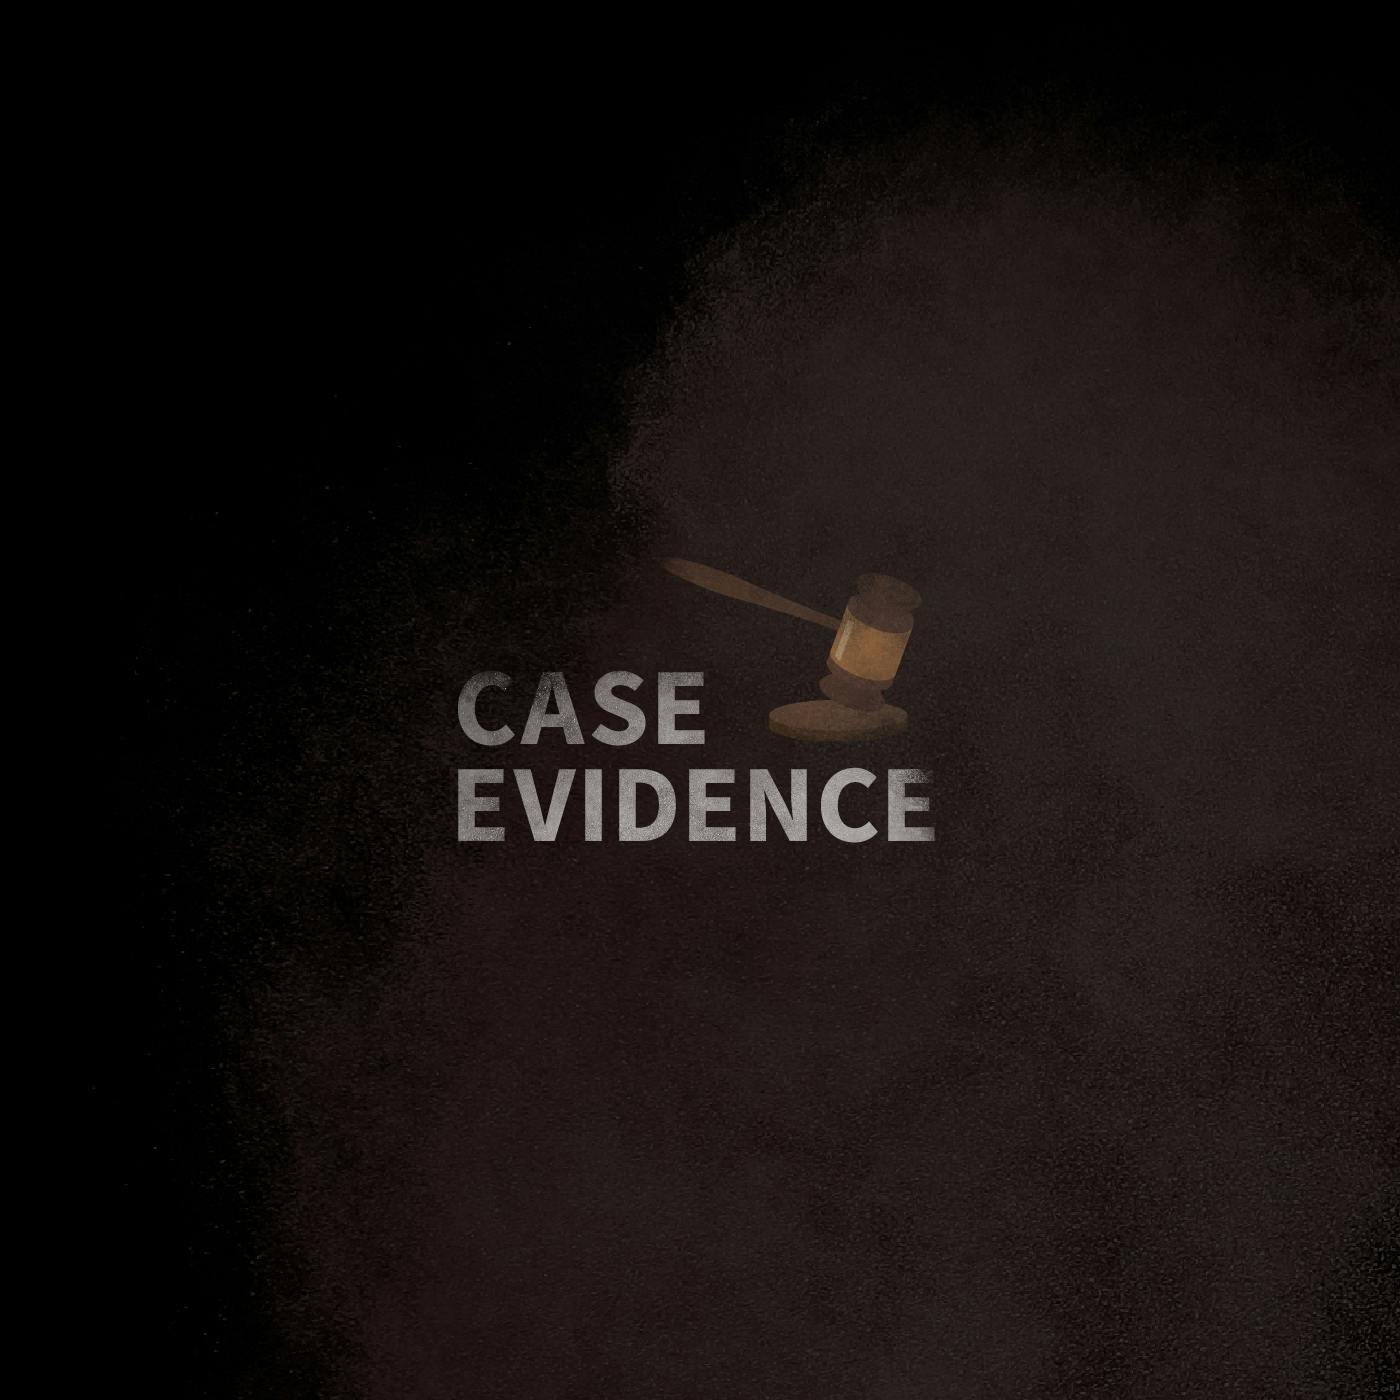 Case Evidence 12.12.16 by Tenderfoot TV